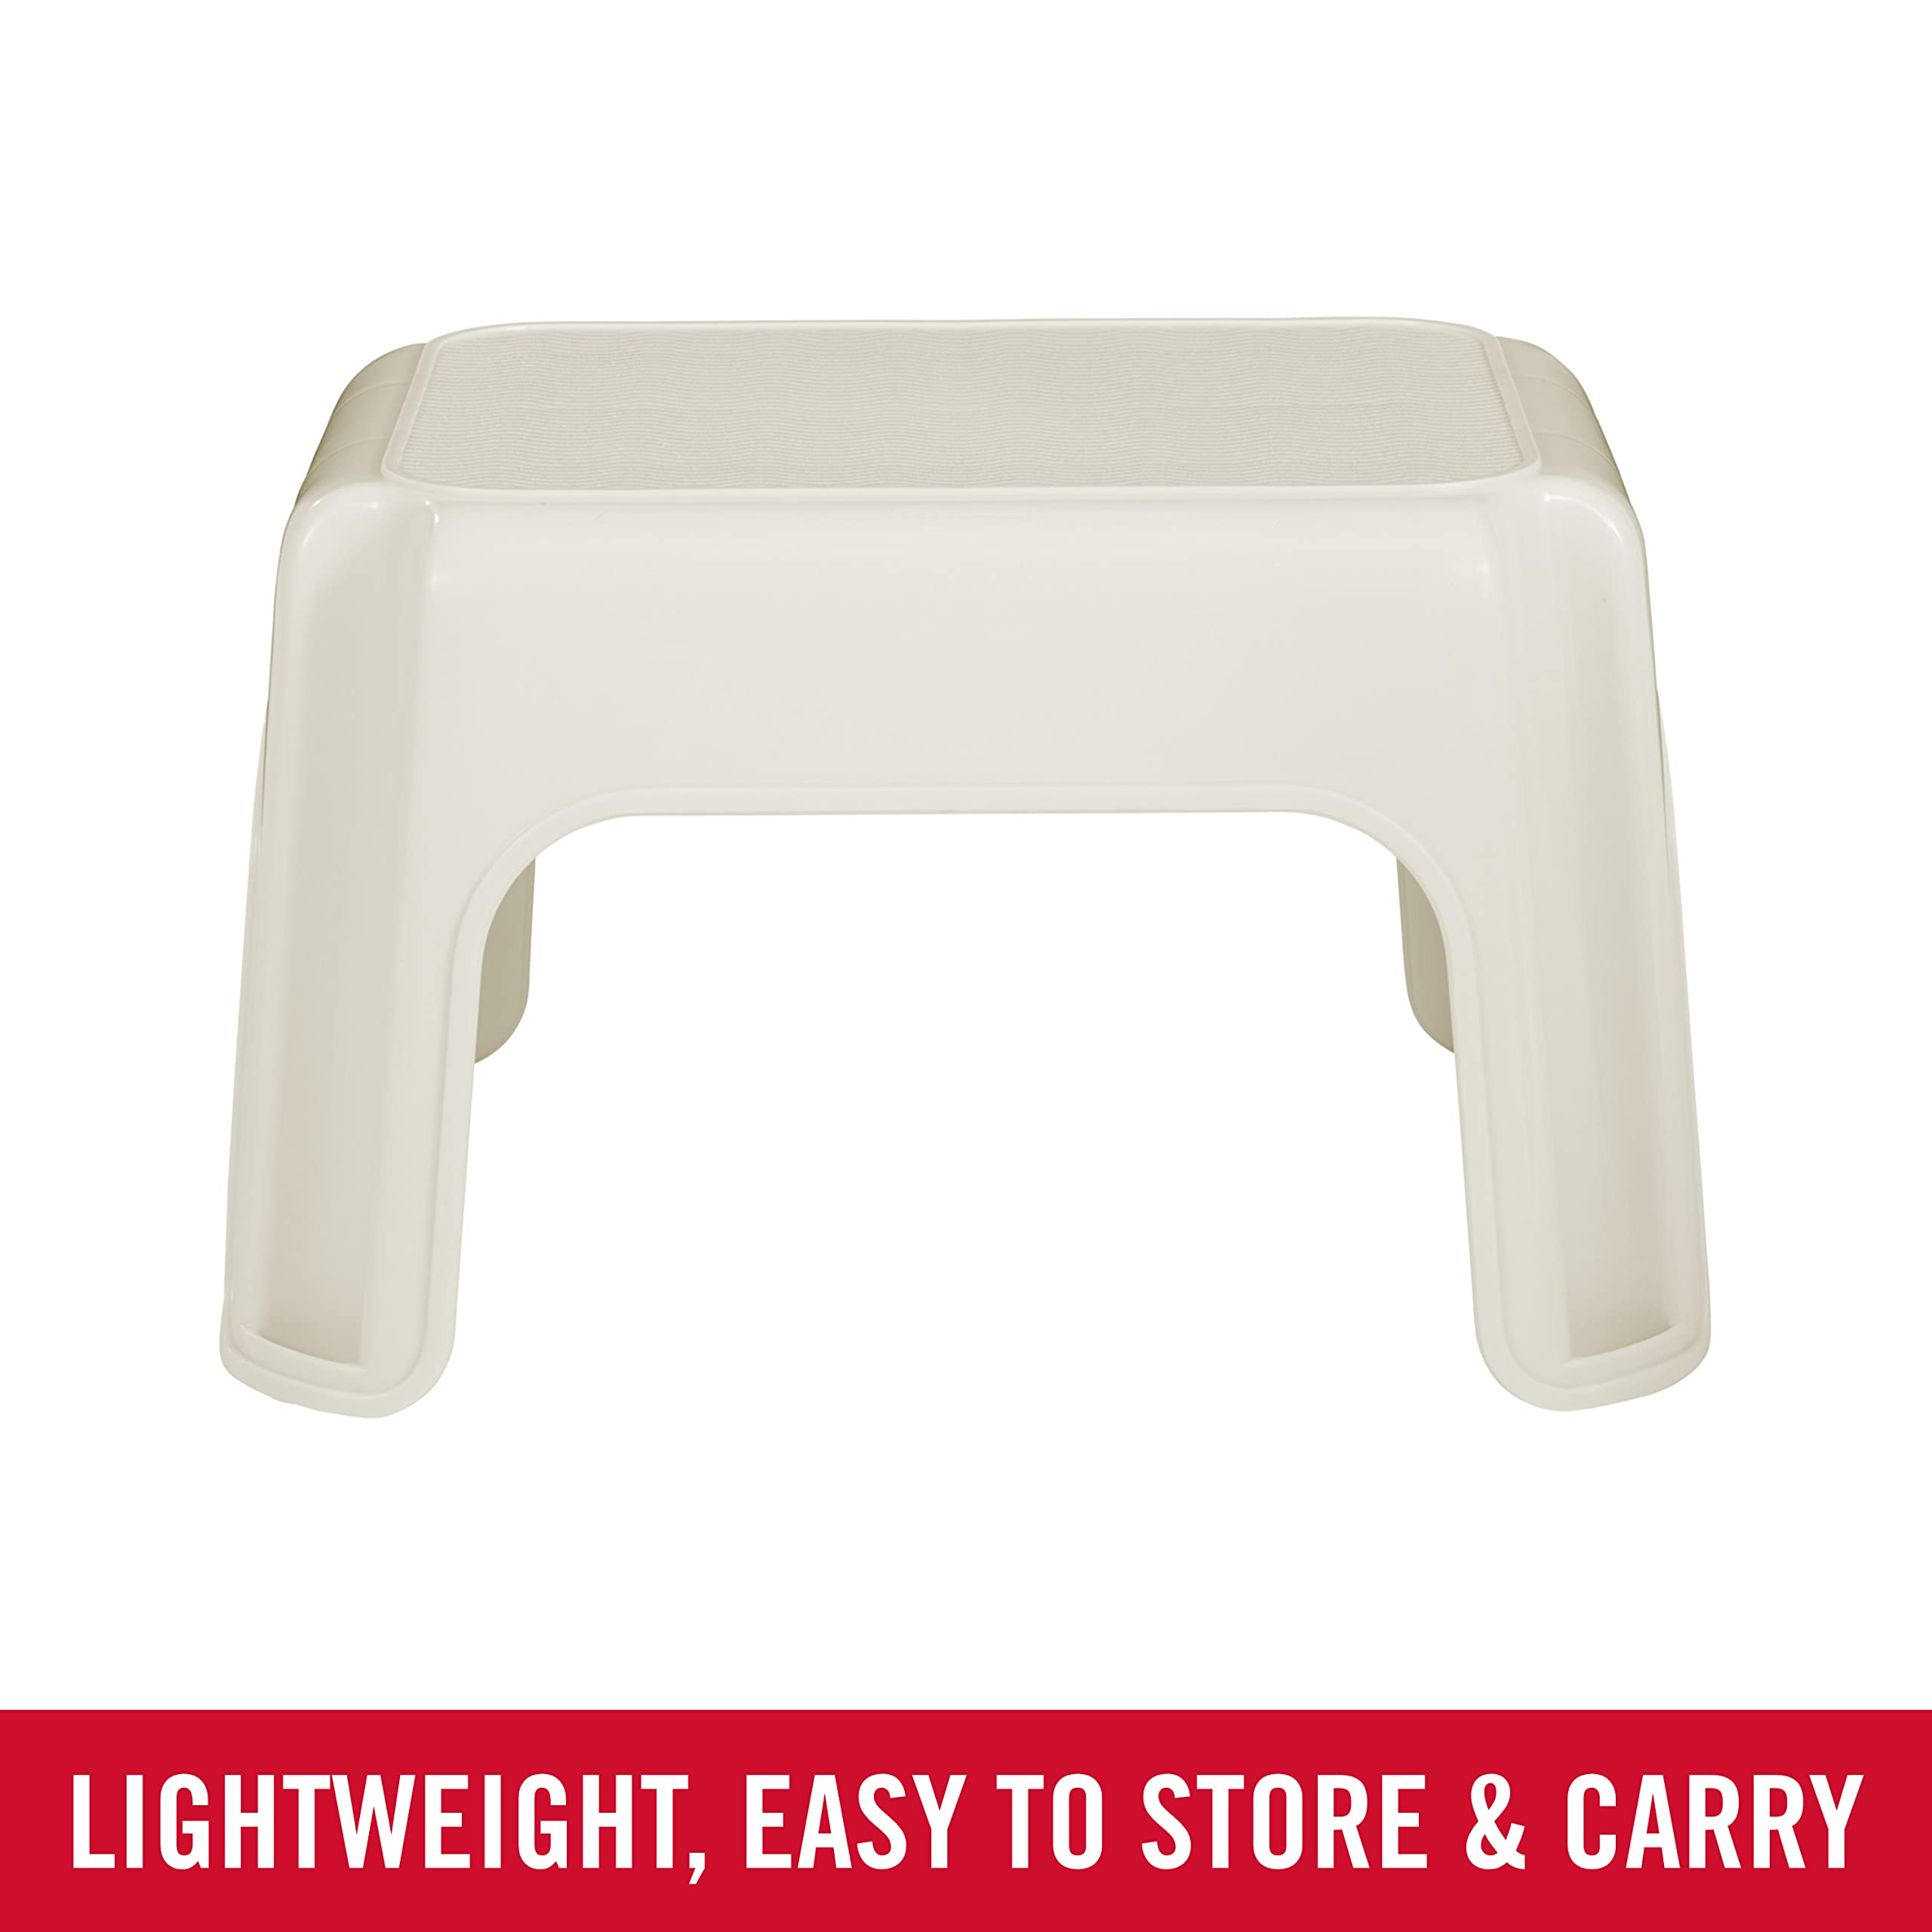 Rubbermaid Roughneck Step-Stool, Bisque, Lightweight, Holds up to 300 pounds, Ideal for Kitchen-Bath, Skid-Resistant